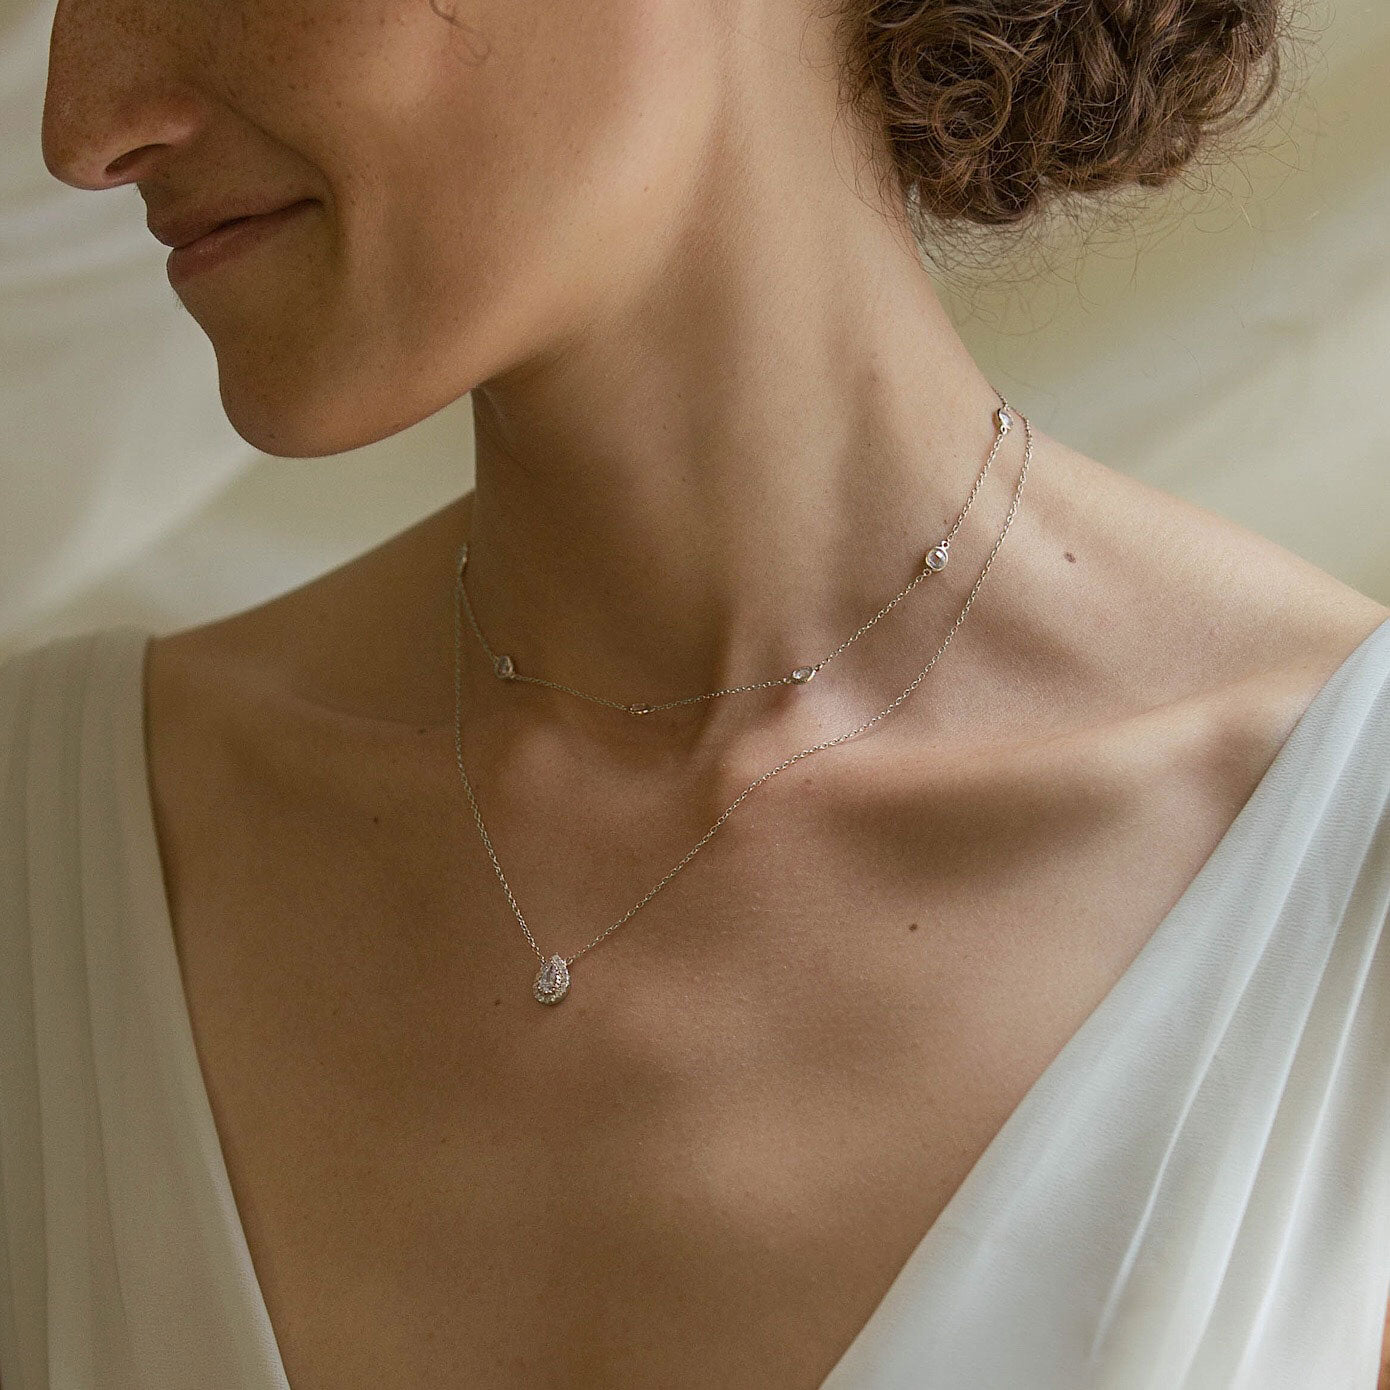 Teardrop Necklace, Layered Necklace, Bridal Jewelry